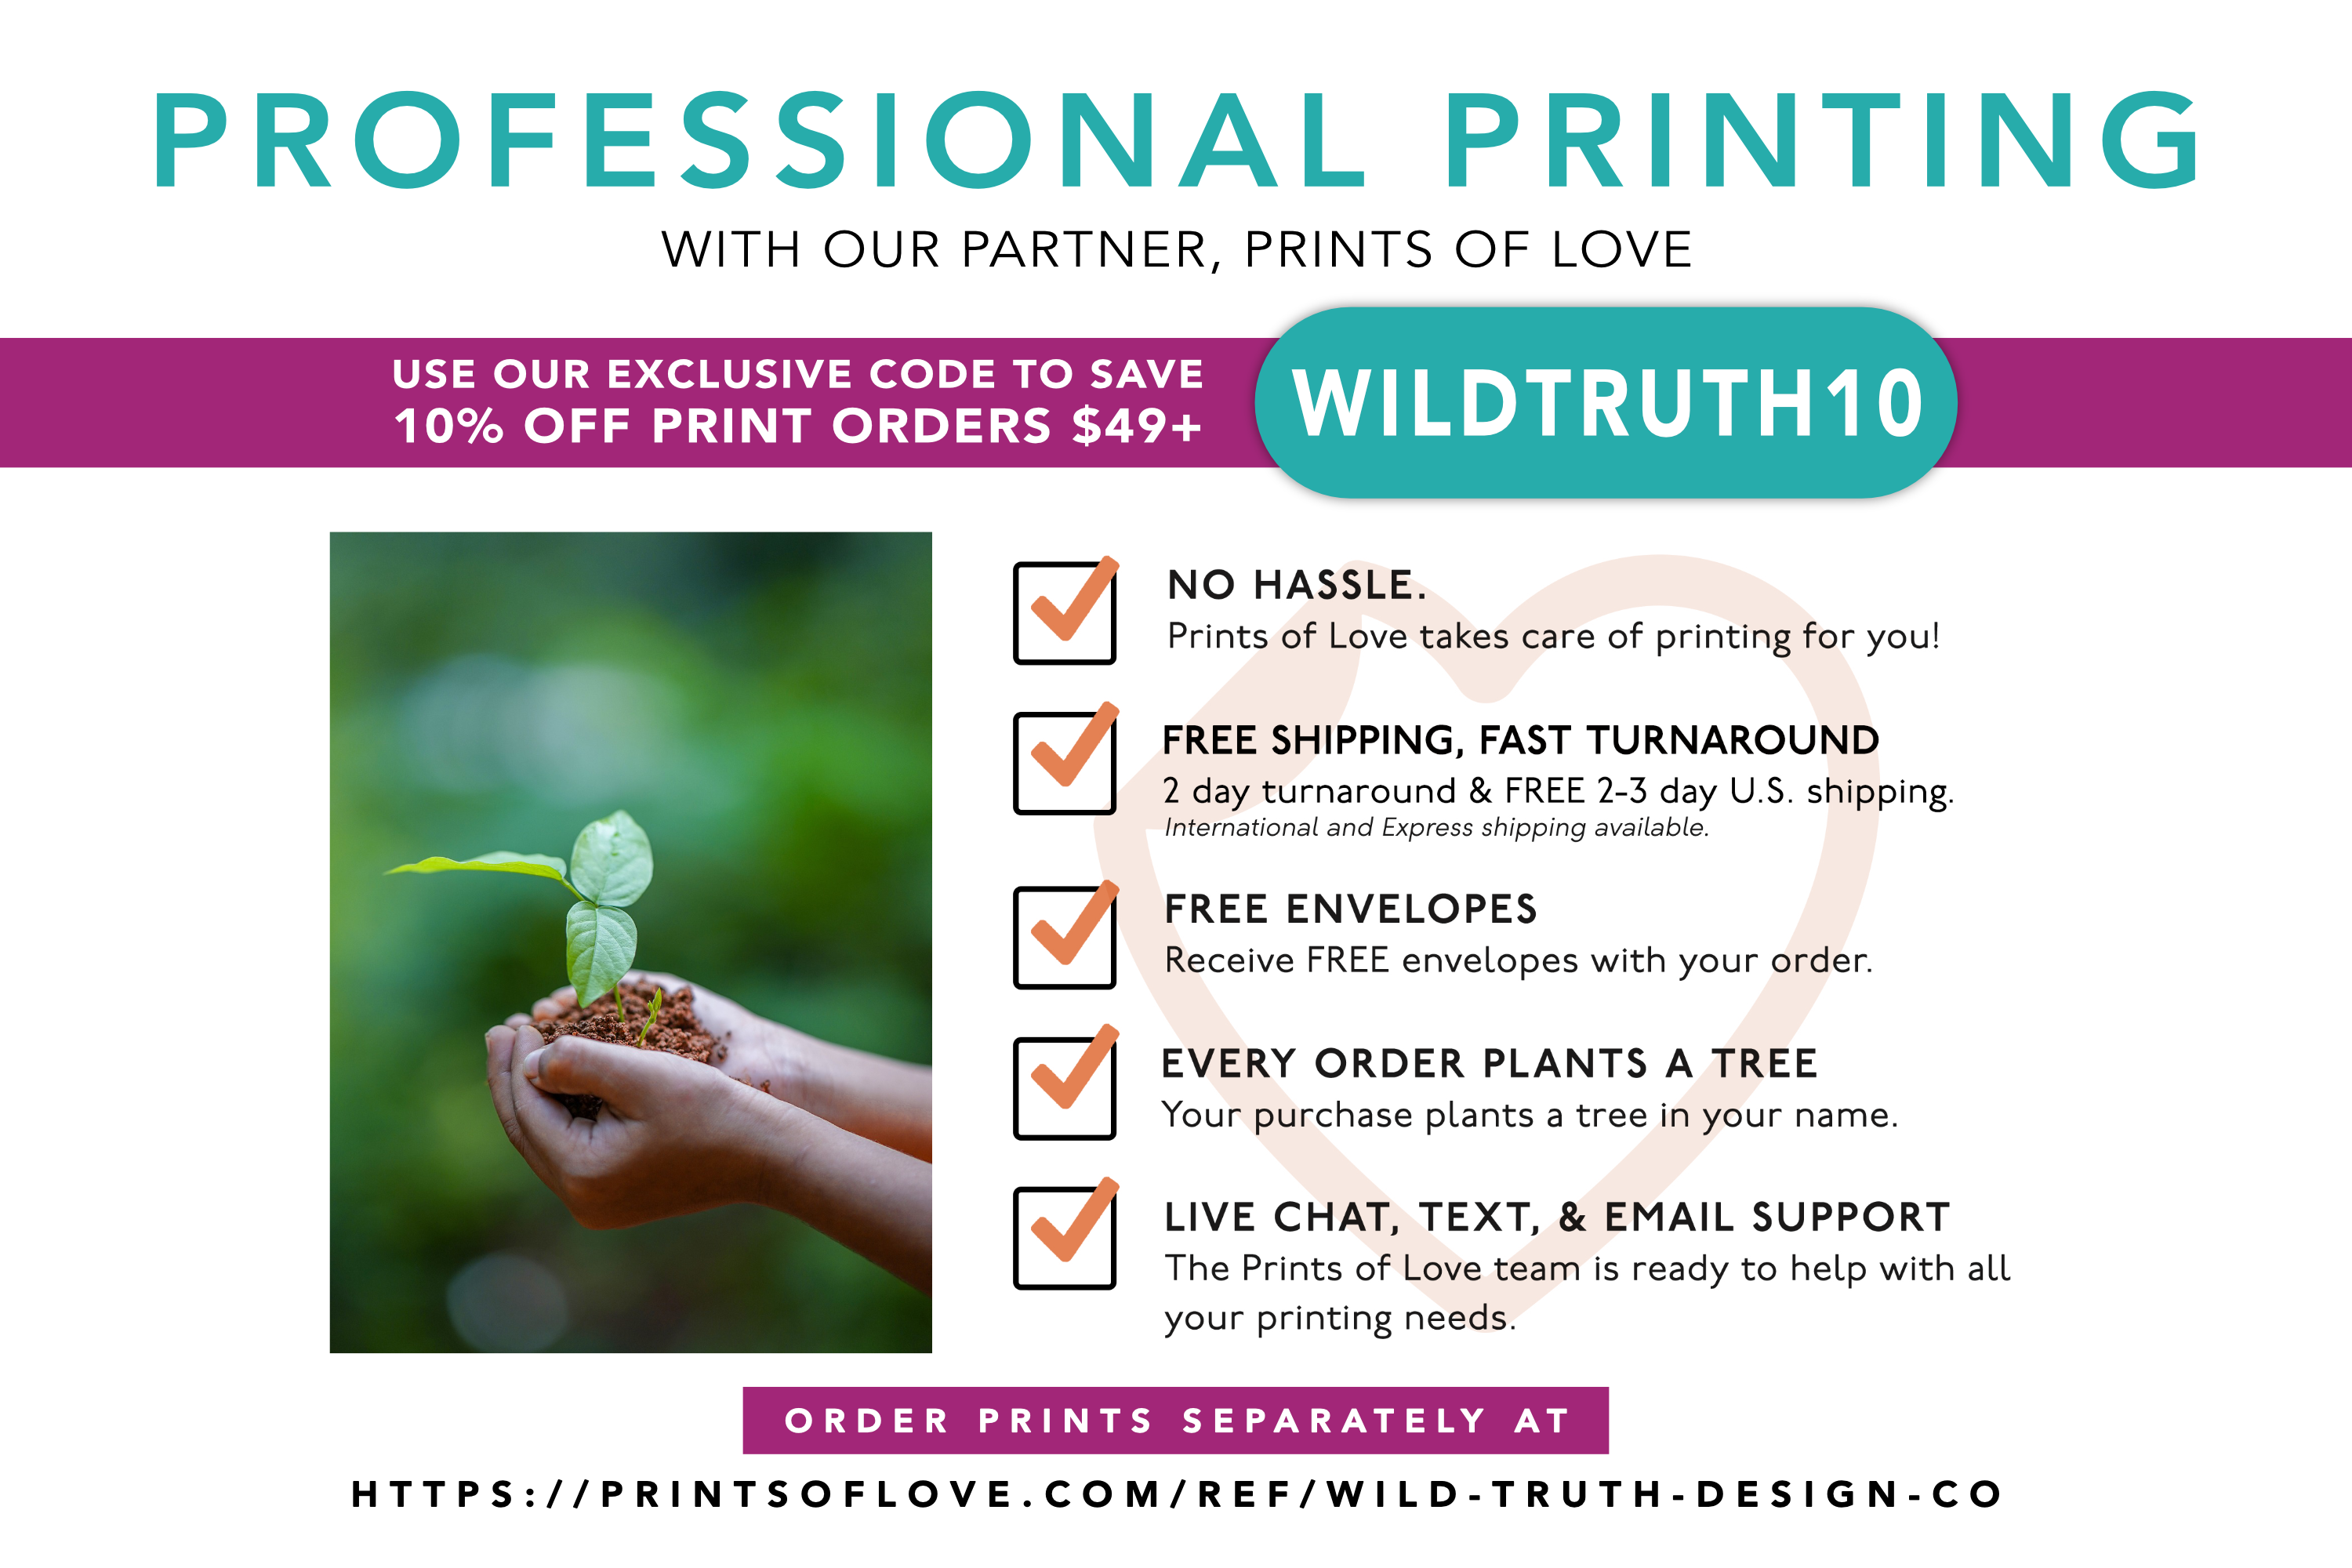 Affordable Sustainable Printing from Prints of Love